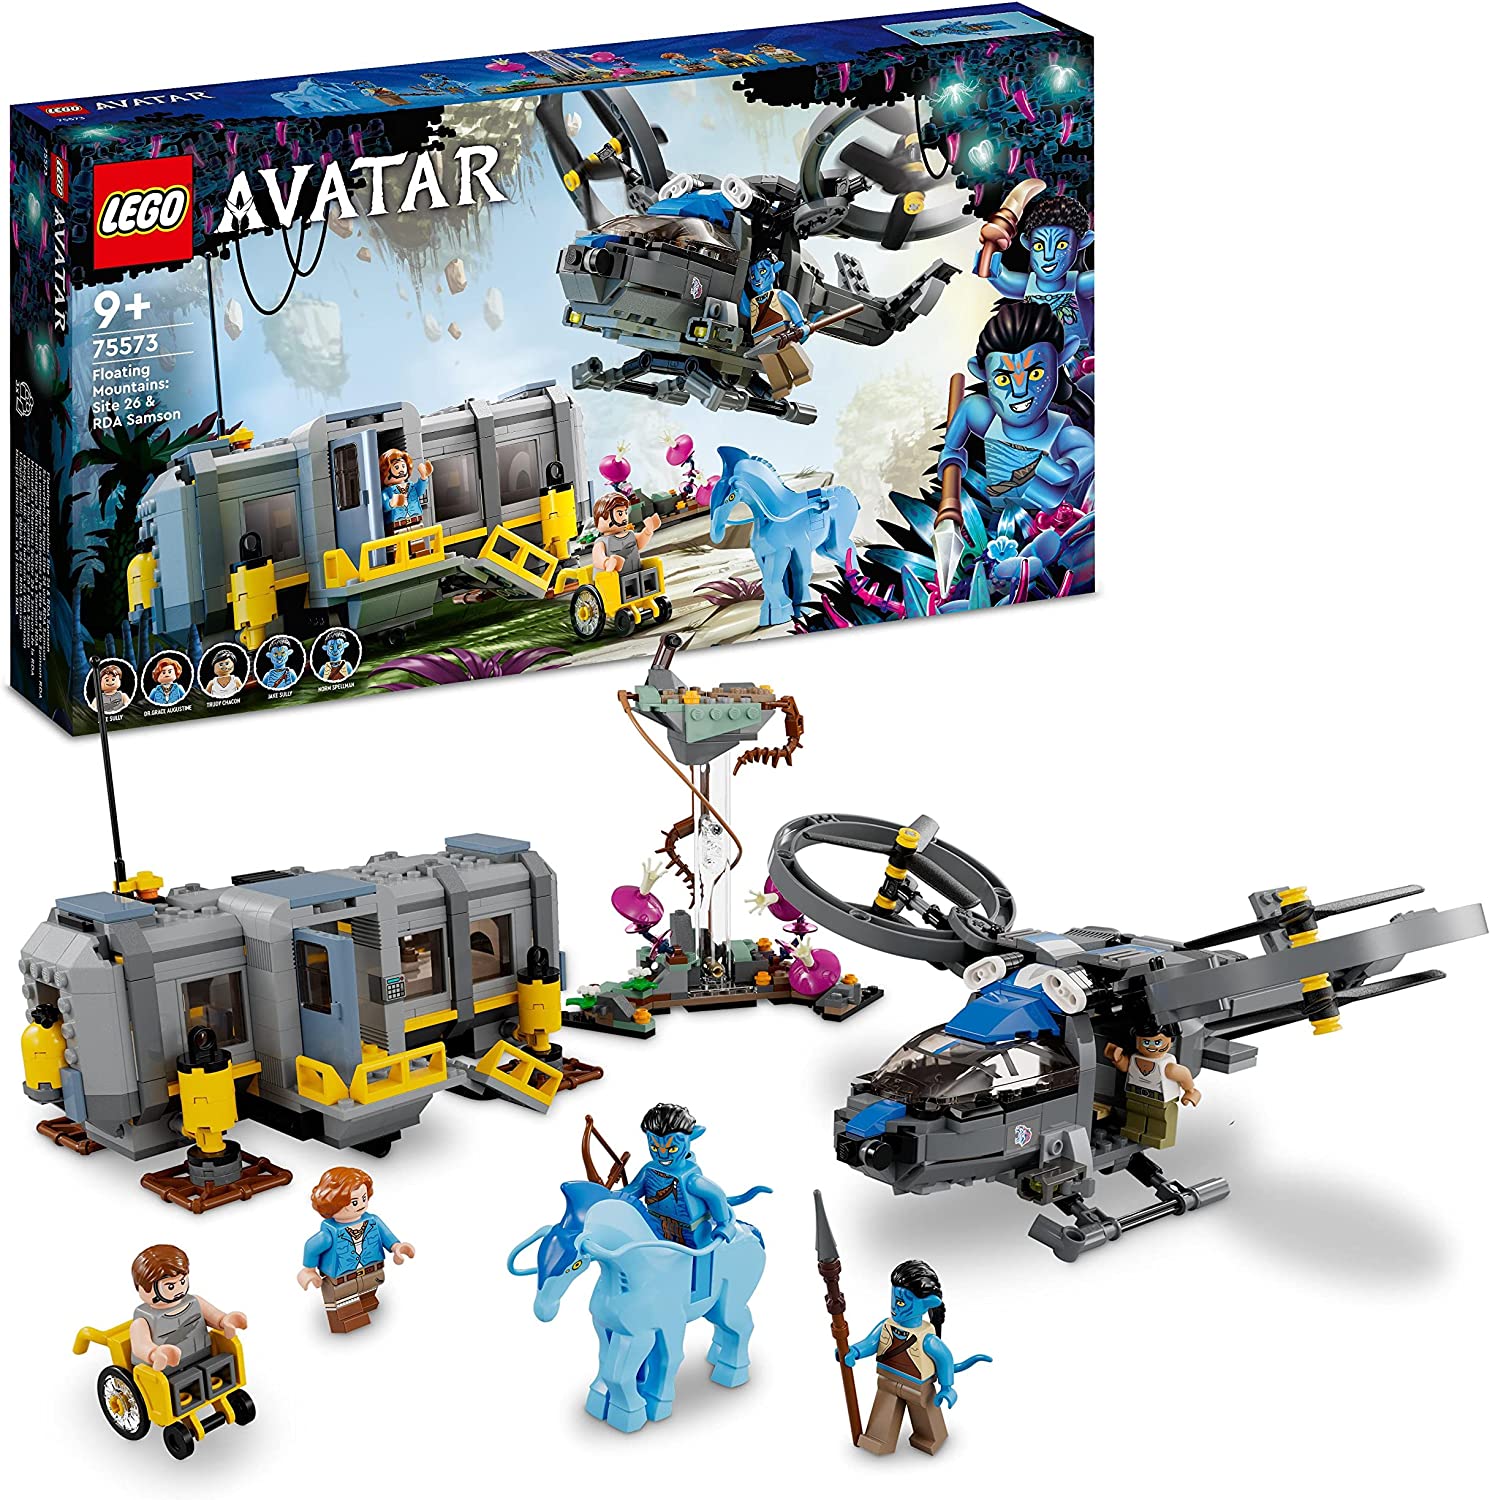 LEGO 75573 Avatar Floating Mountains: Site 26 and RDA Samson, Buildable Helicopter Toy for Children with Thorror Horse Animal Figure and 5 Minifigures